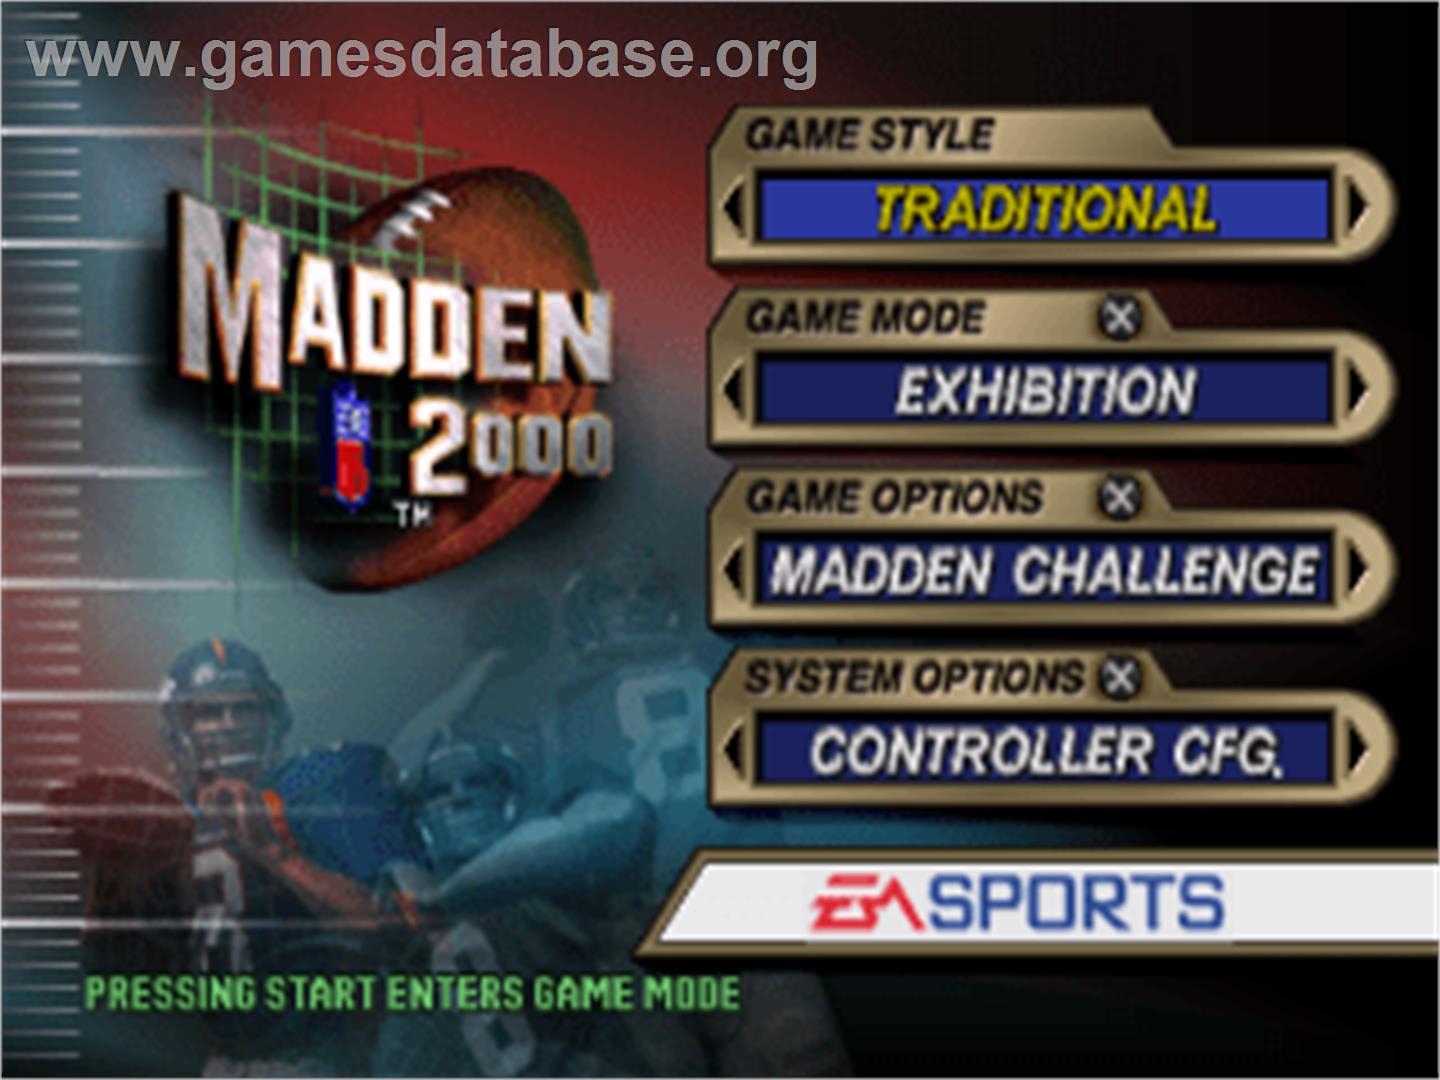 Madden NFL 2000 - Sony Playstation - Artwork - Title Screen